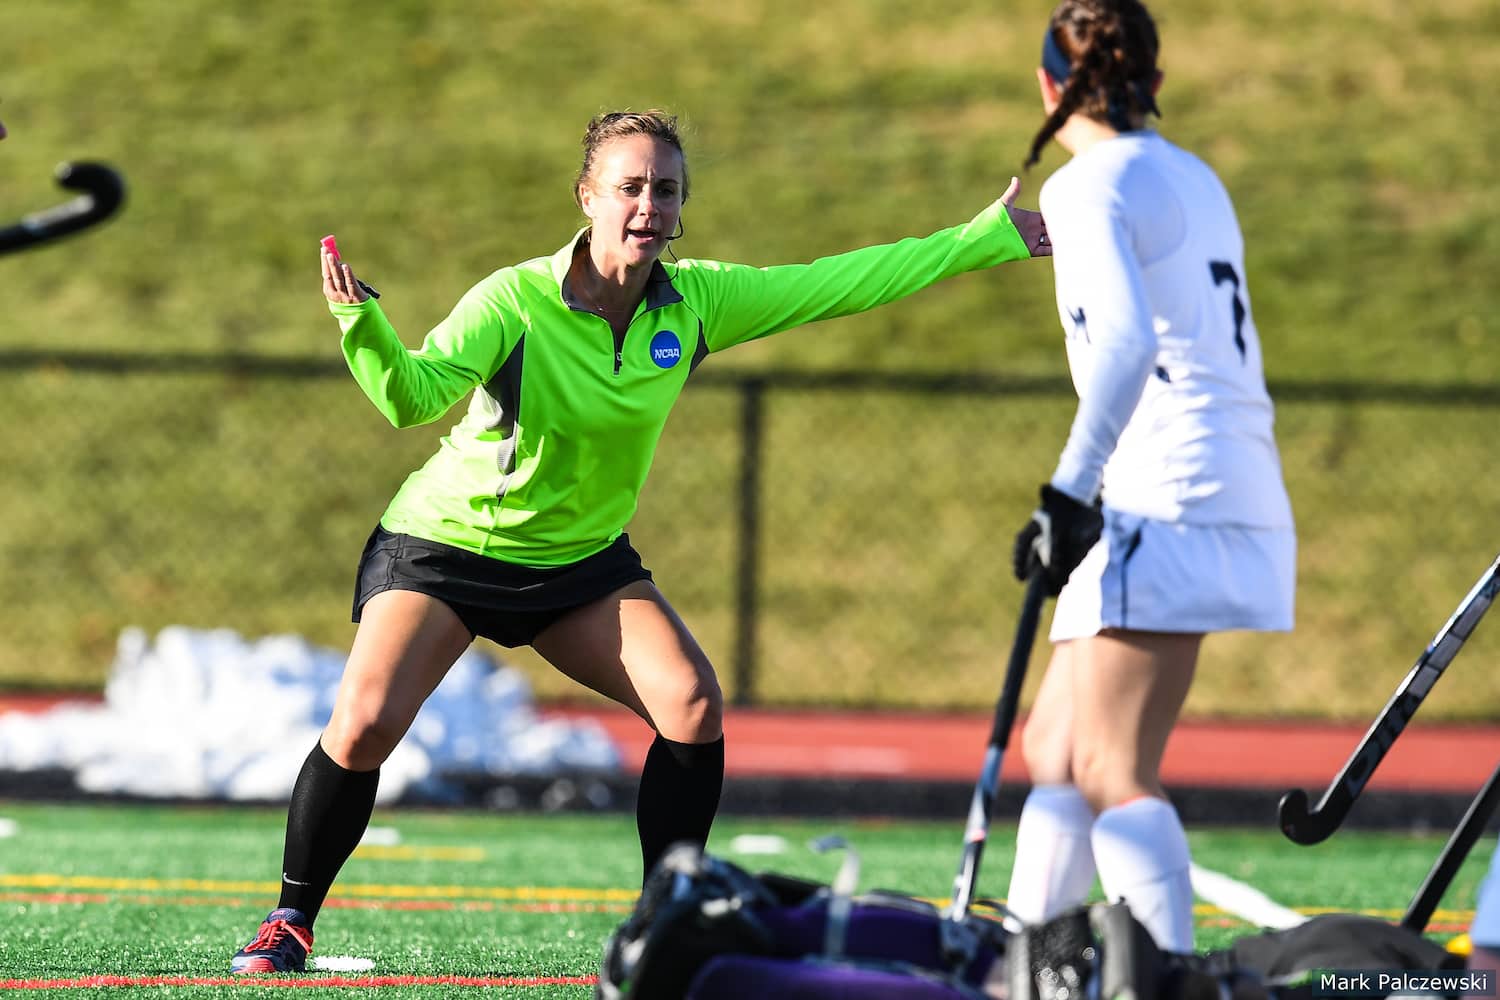 USA Umpire Mallory Federoff officiates the 2019 NCAA Division III Championship between West Chester and Saint Anselm at Millersville University in Pennsylvania